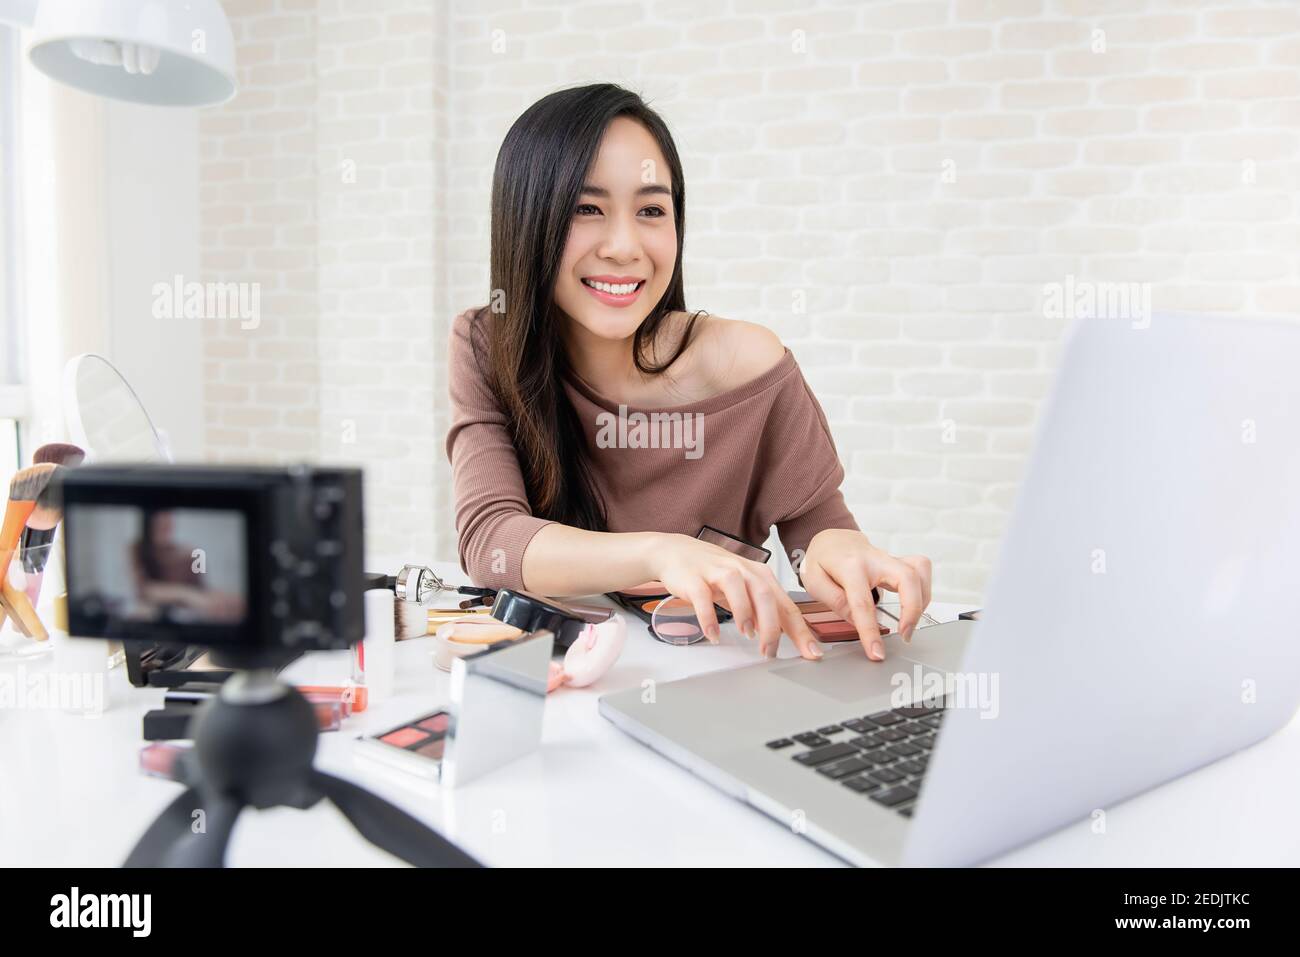 Asian woman professional beauty vlogger cheking feedback from audiences while doing cosmetic makeup tutorial live broadcasting on social media Stock Photo